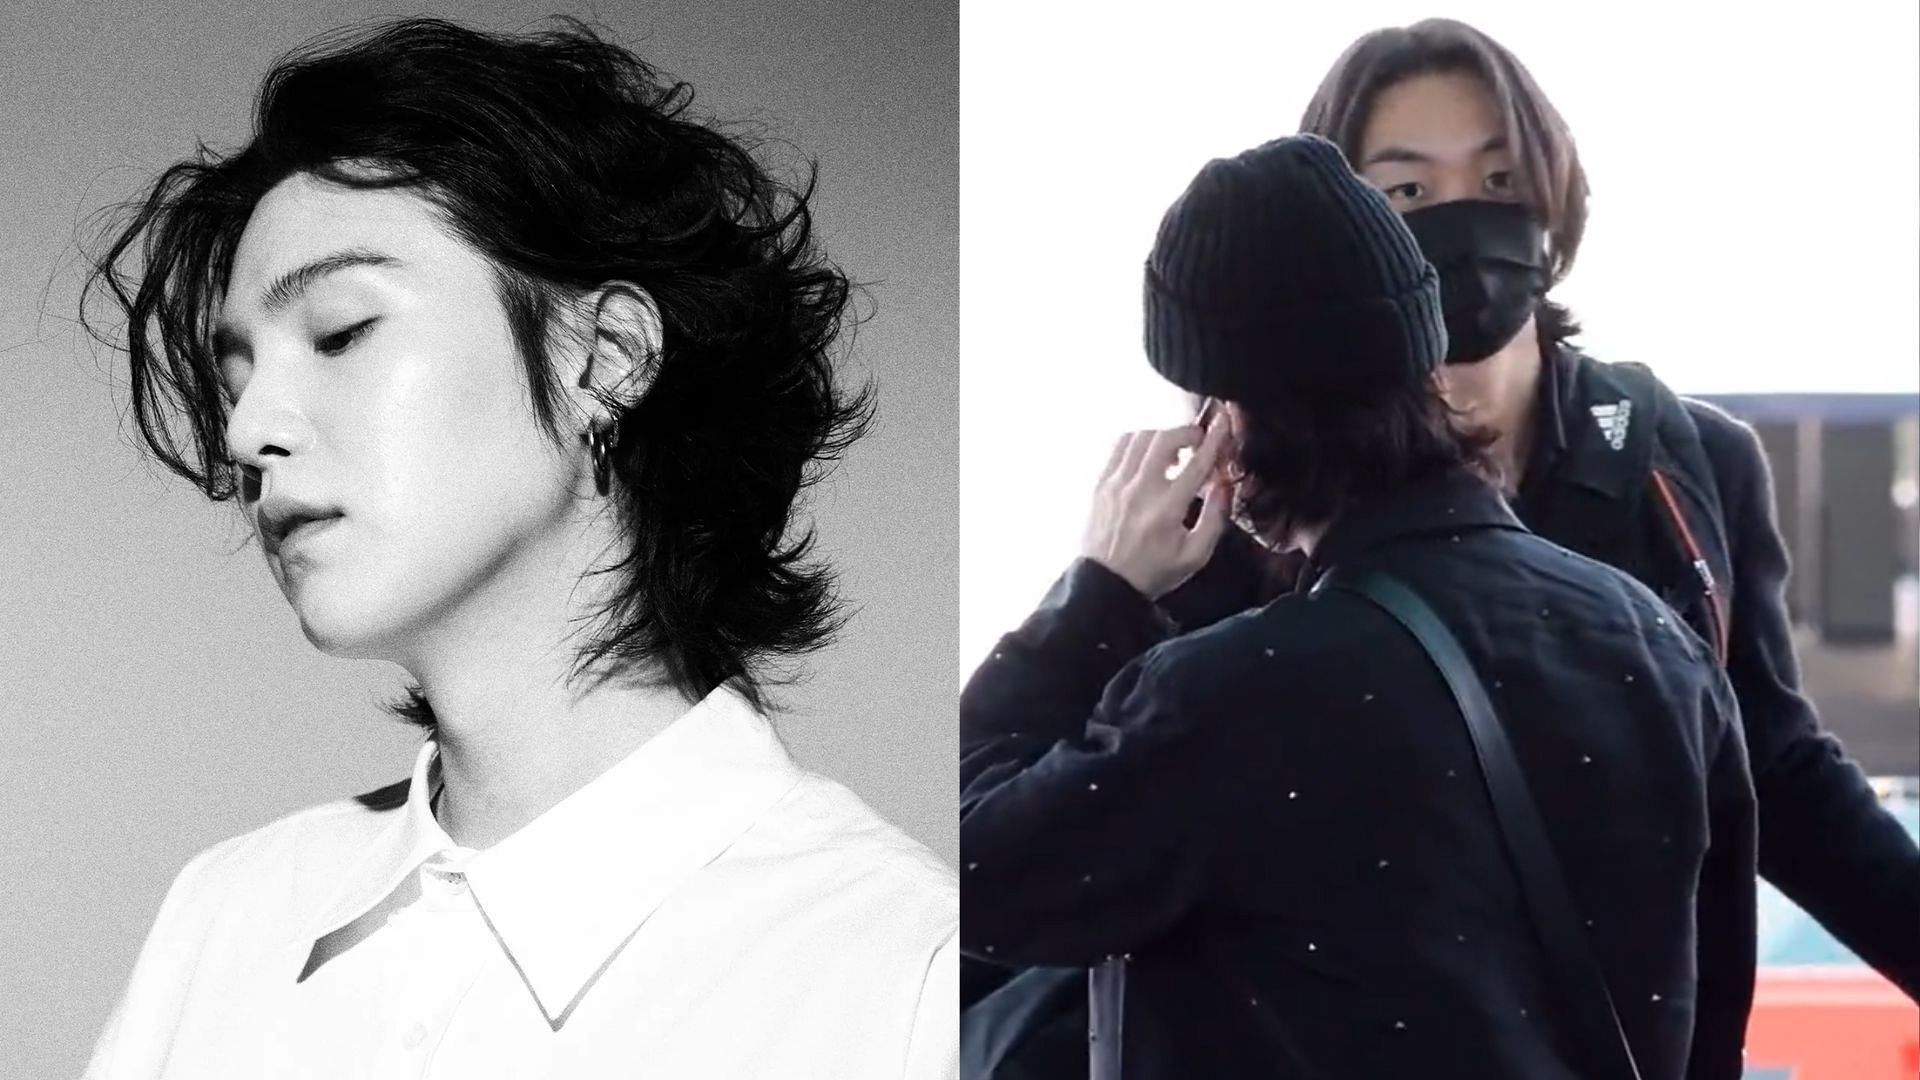 BTS airport diaries: Suga's long hair to Taehyung-Jimin's VMin moment,  K-pop stars ahead of White House visit